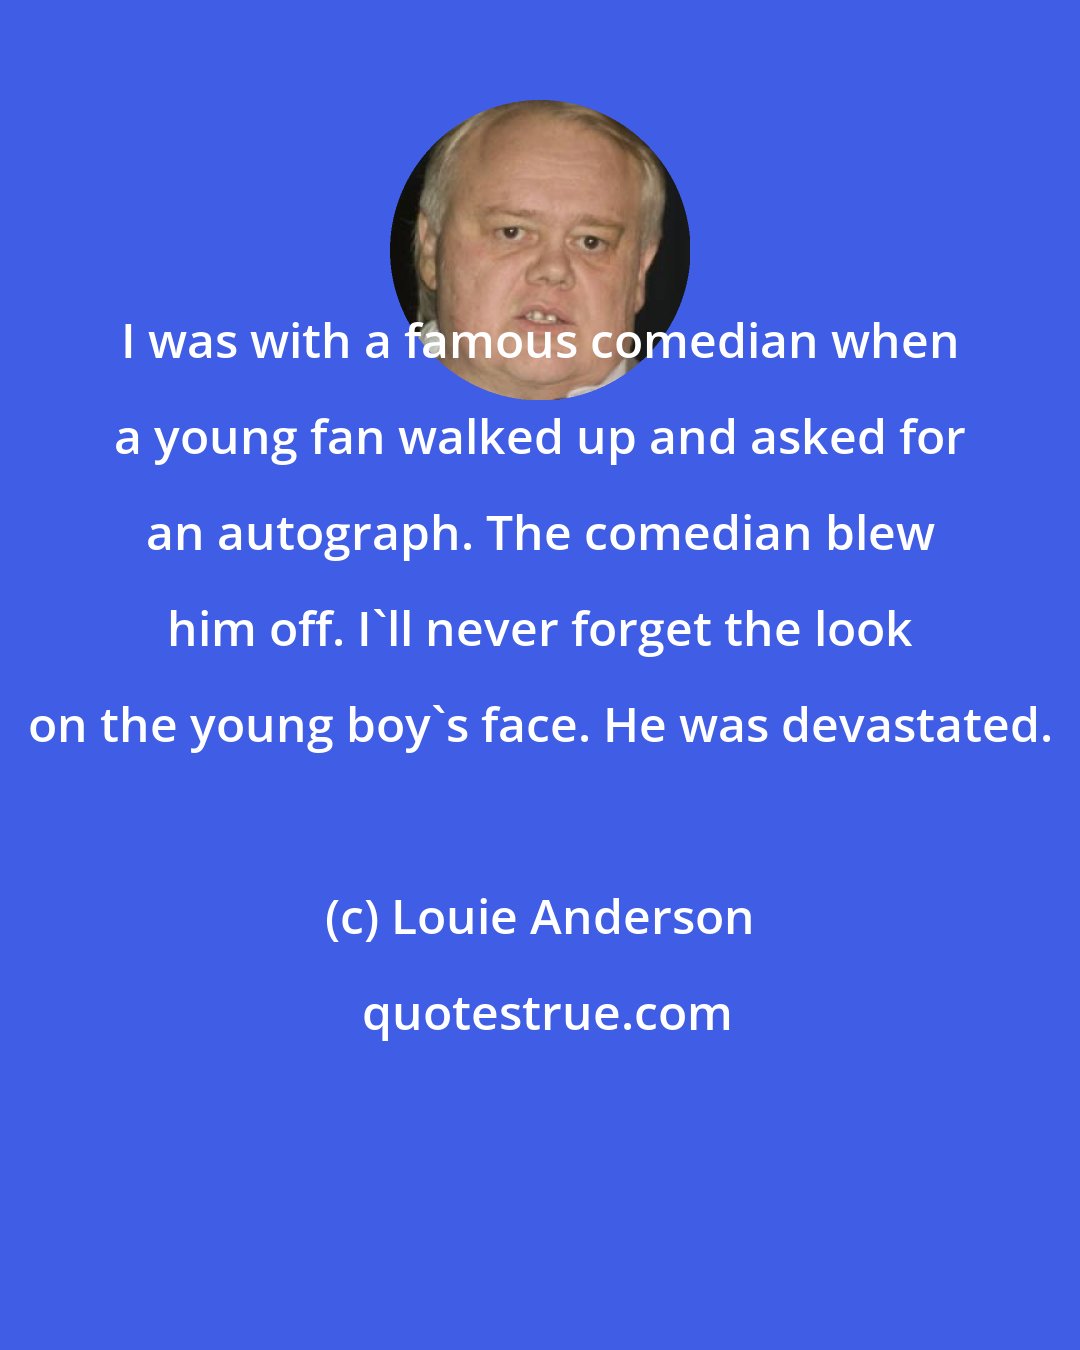 Louie Anderson: I was with a famous comedian when a young fan walked up and asked for an autograph. The comedian blew him off. I'll never forget the look on the young boy's face. He was devastated.